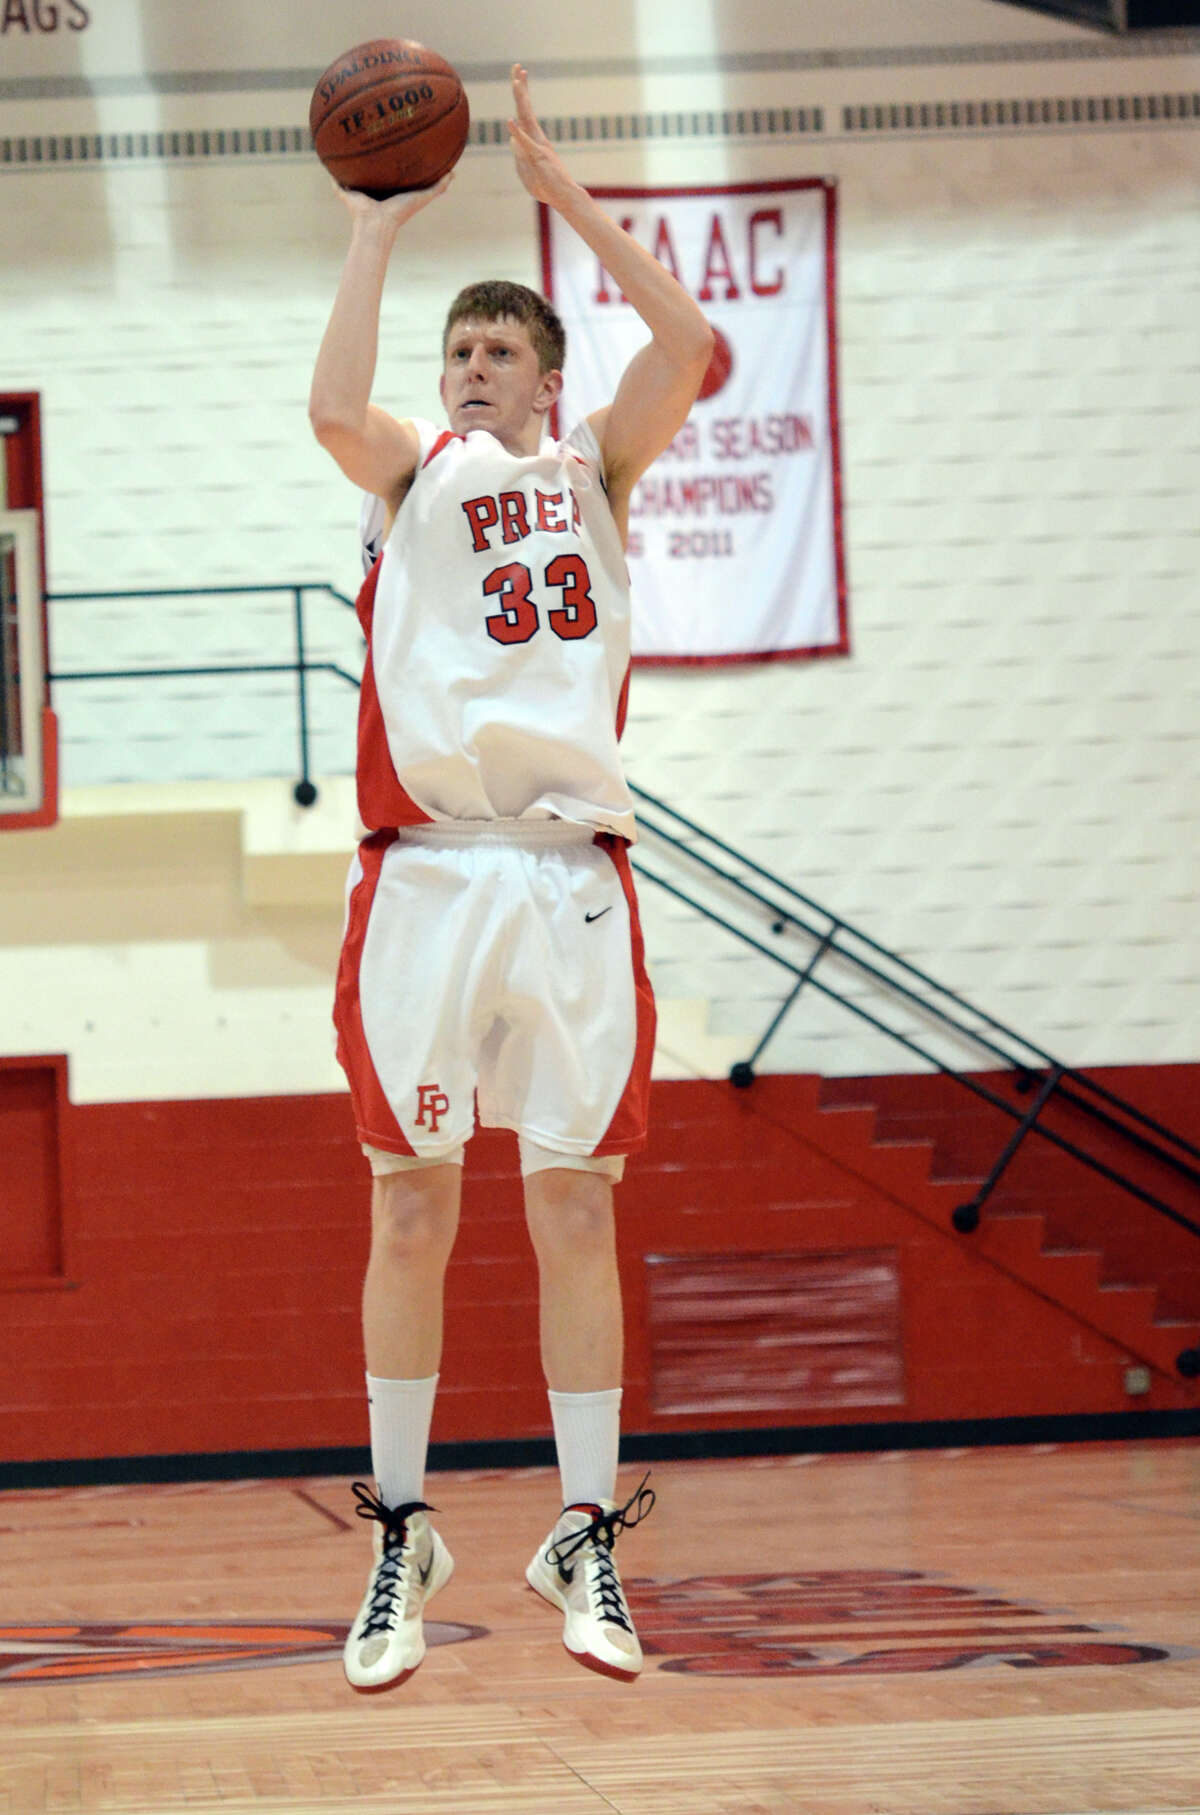 Fairfield Prep's Tim Butala, seen in action last season, scored 23 points Tuesday night to pace the Jesuits to their first-ever win over Career Magnate.